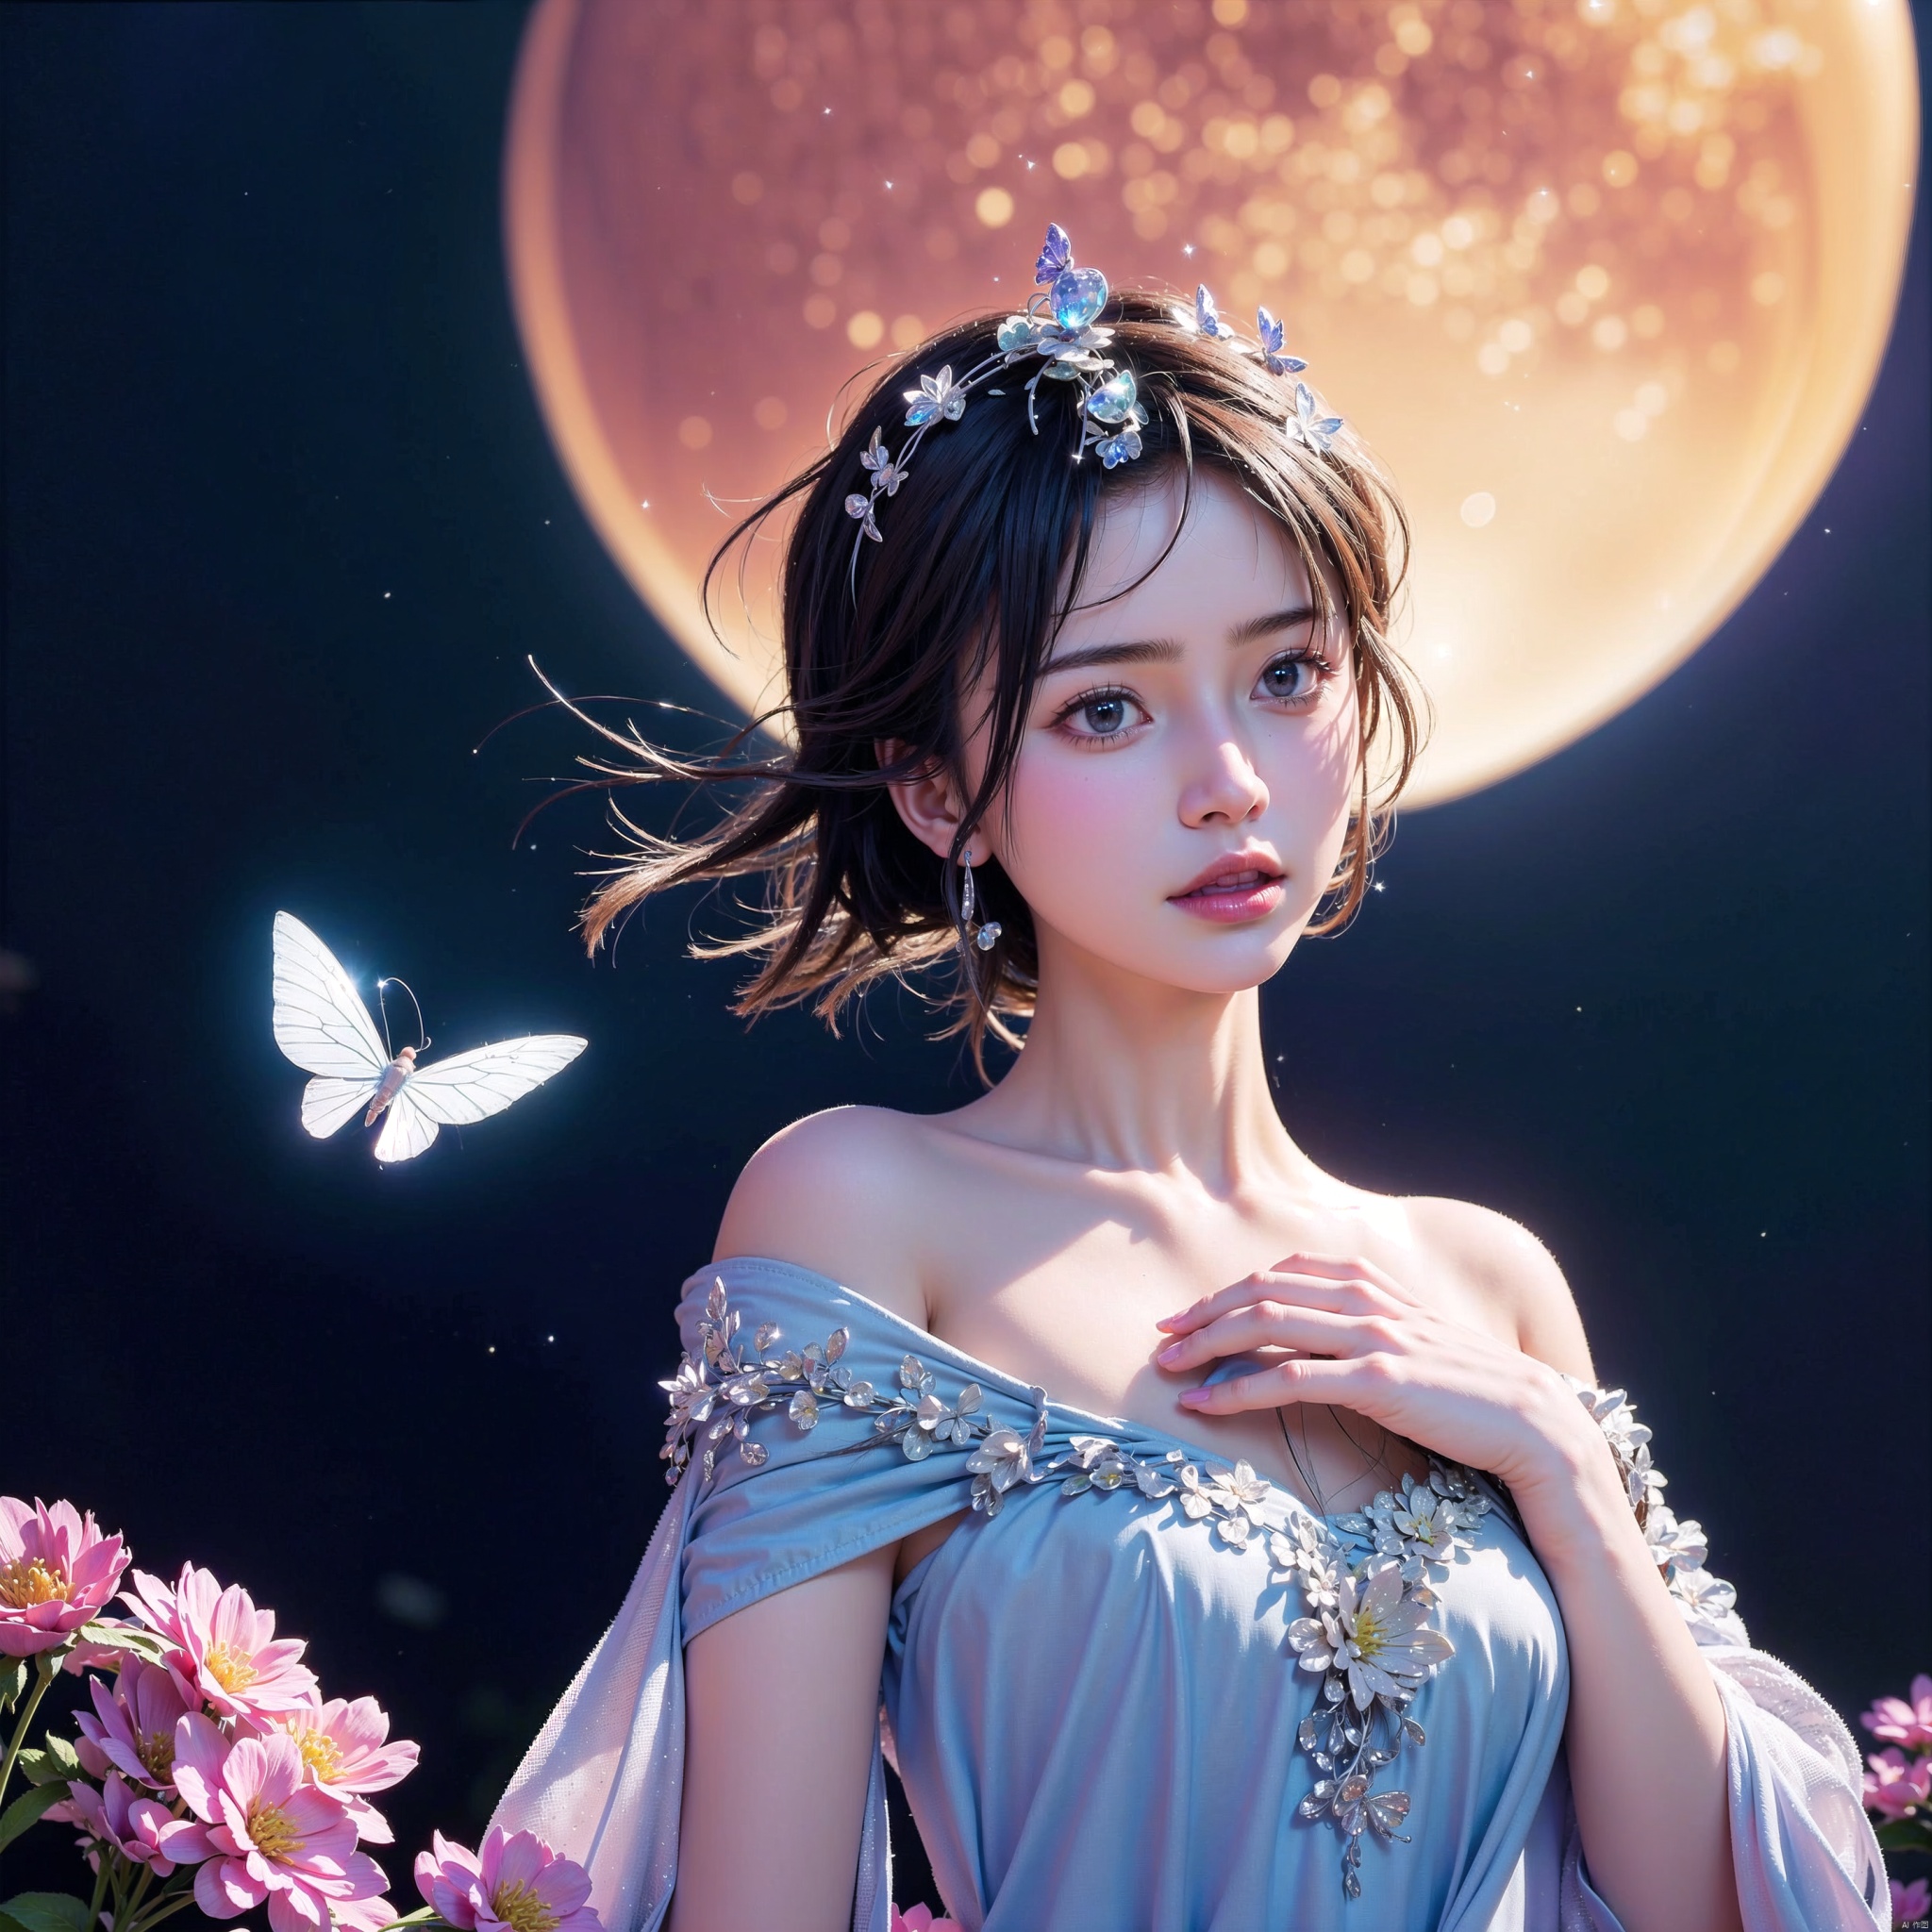  1 girl,purple hair,(brown eyes),(extremely exquisite and beautiful),meteor,meteor shower,(super large moon),(blue moon),(background glowing magic castle:1.5),comet,flower sea,many flowers,flower sea facing the audience,front,solo,butterfly,flying butterfly,There are many butterflies,butterfly hair flower,perspective,half skirt,dreamy light,(8k, RAW photo, best quality, masterpiece:1.2),(realistic, photo fidelity:1.3),Ultra fine,ultra fine cg 8k wallpaper,(crystal textured skin:1.2),background crystal palace,((glowing magic creatures)),fantasy moonlight,the bright moon,night with fireflies,a beautiful woman in a shoulder-drop dress,bunches,